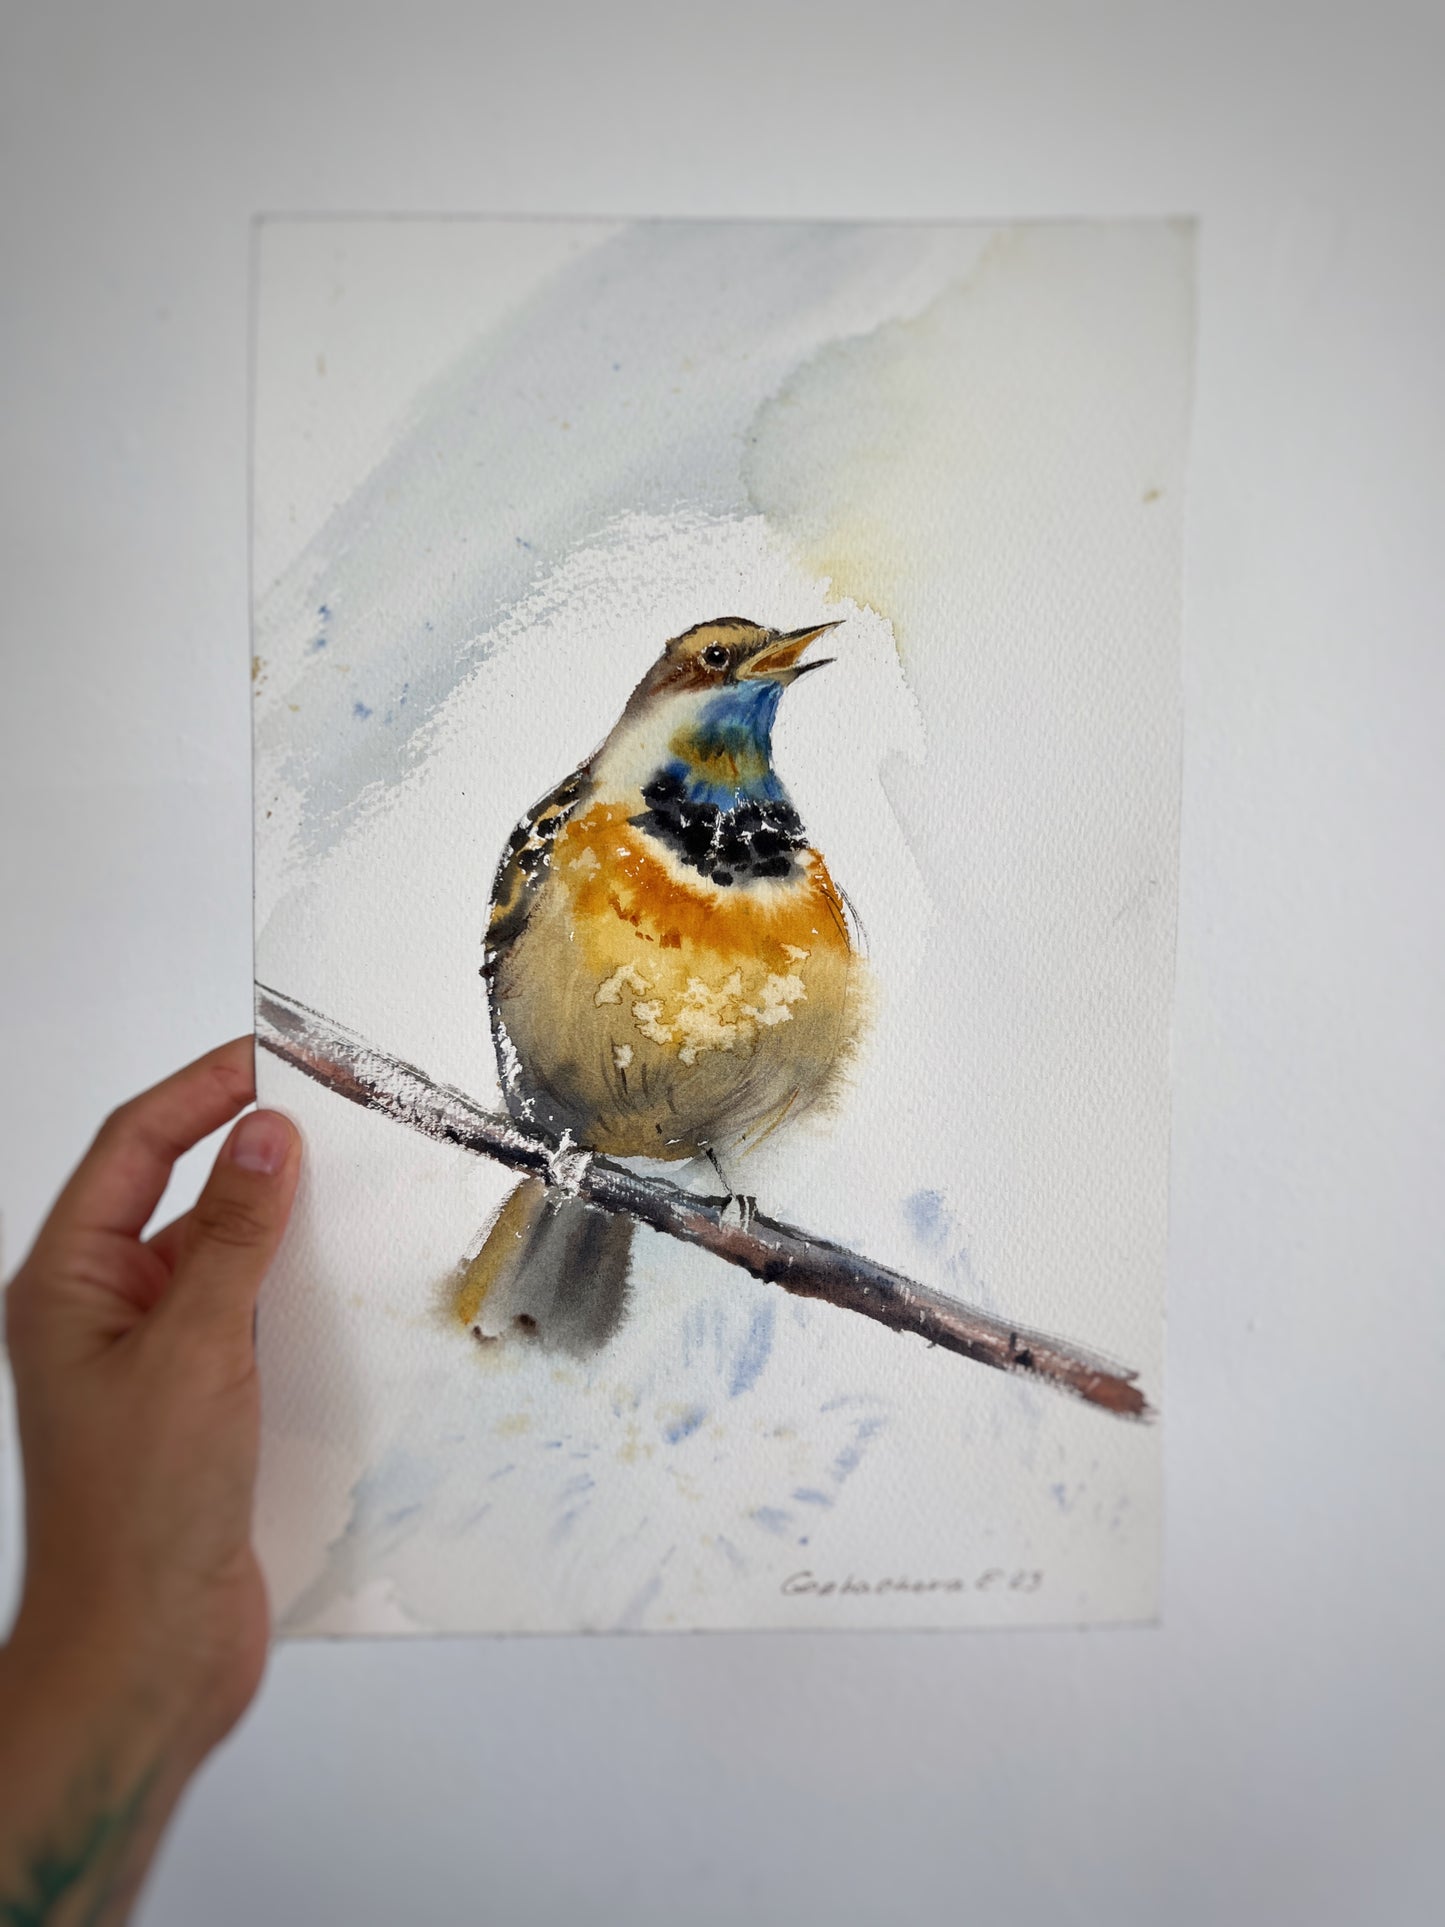 Watercolor Bird Art - Original Painting, Vibrant Wall Art for Nursery Room Decor, Perfect Gift for Nature Lovers